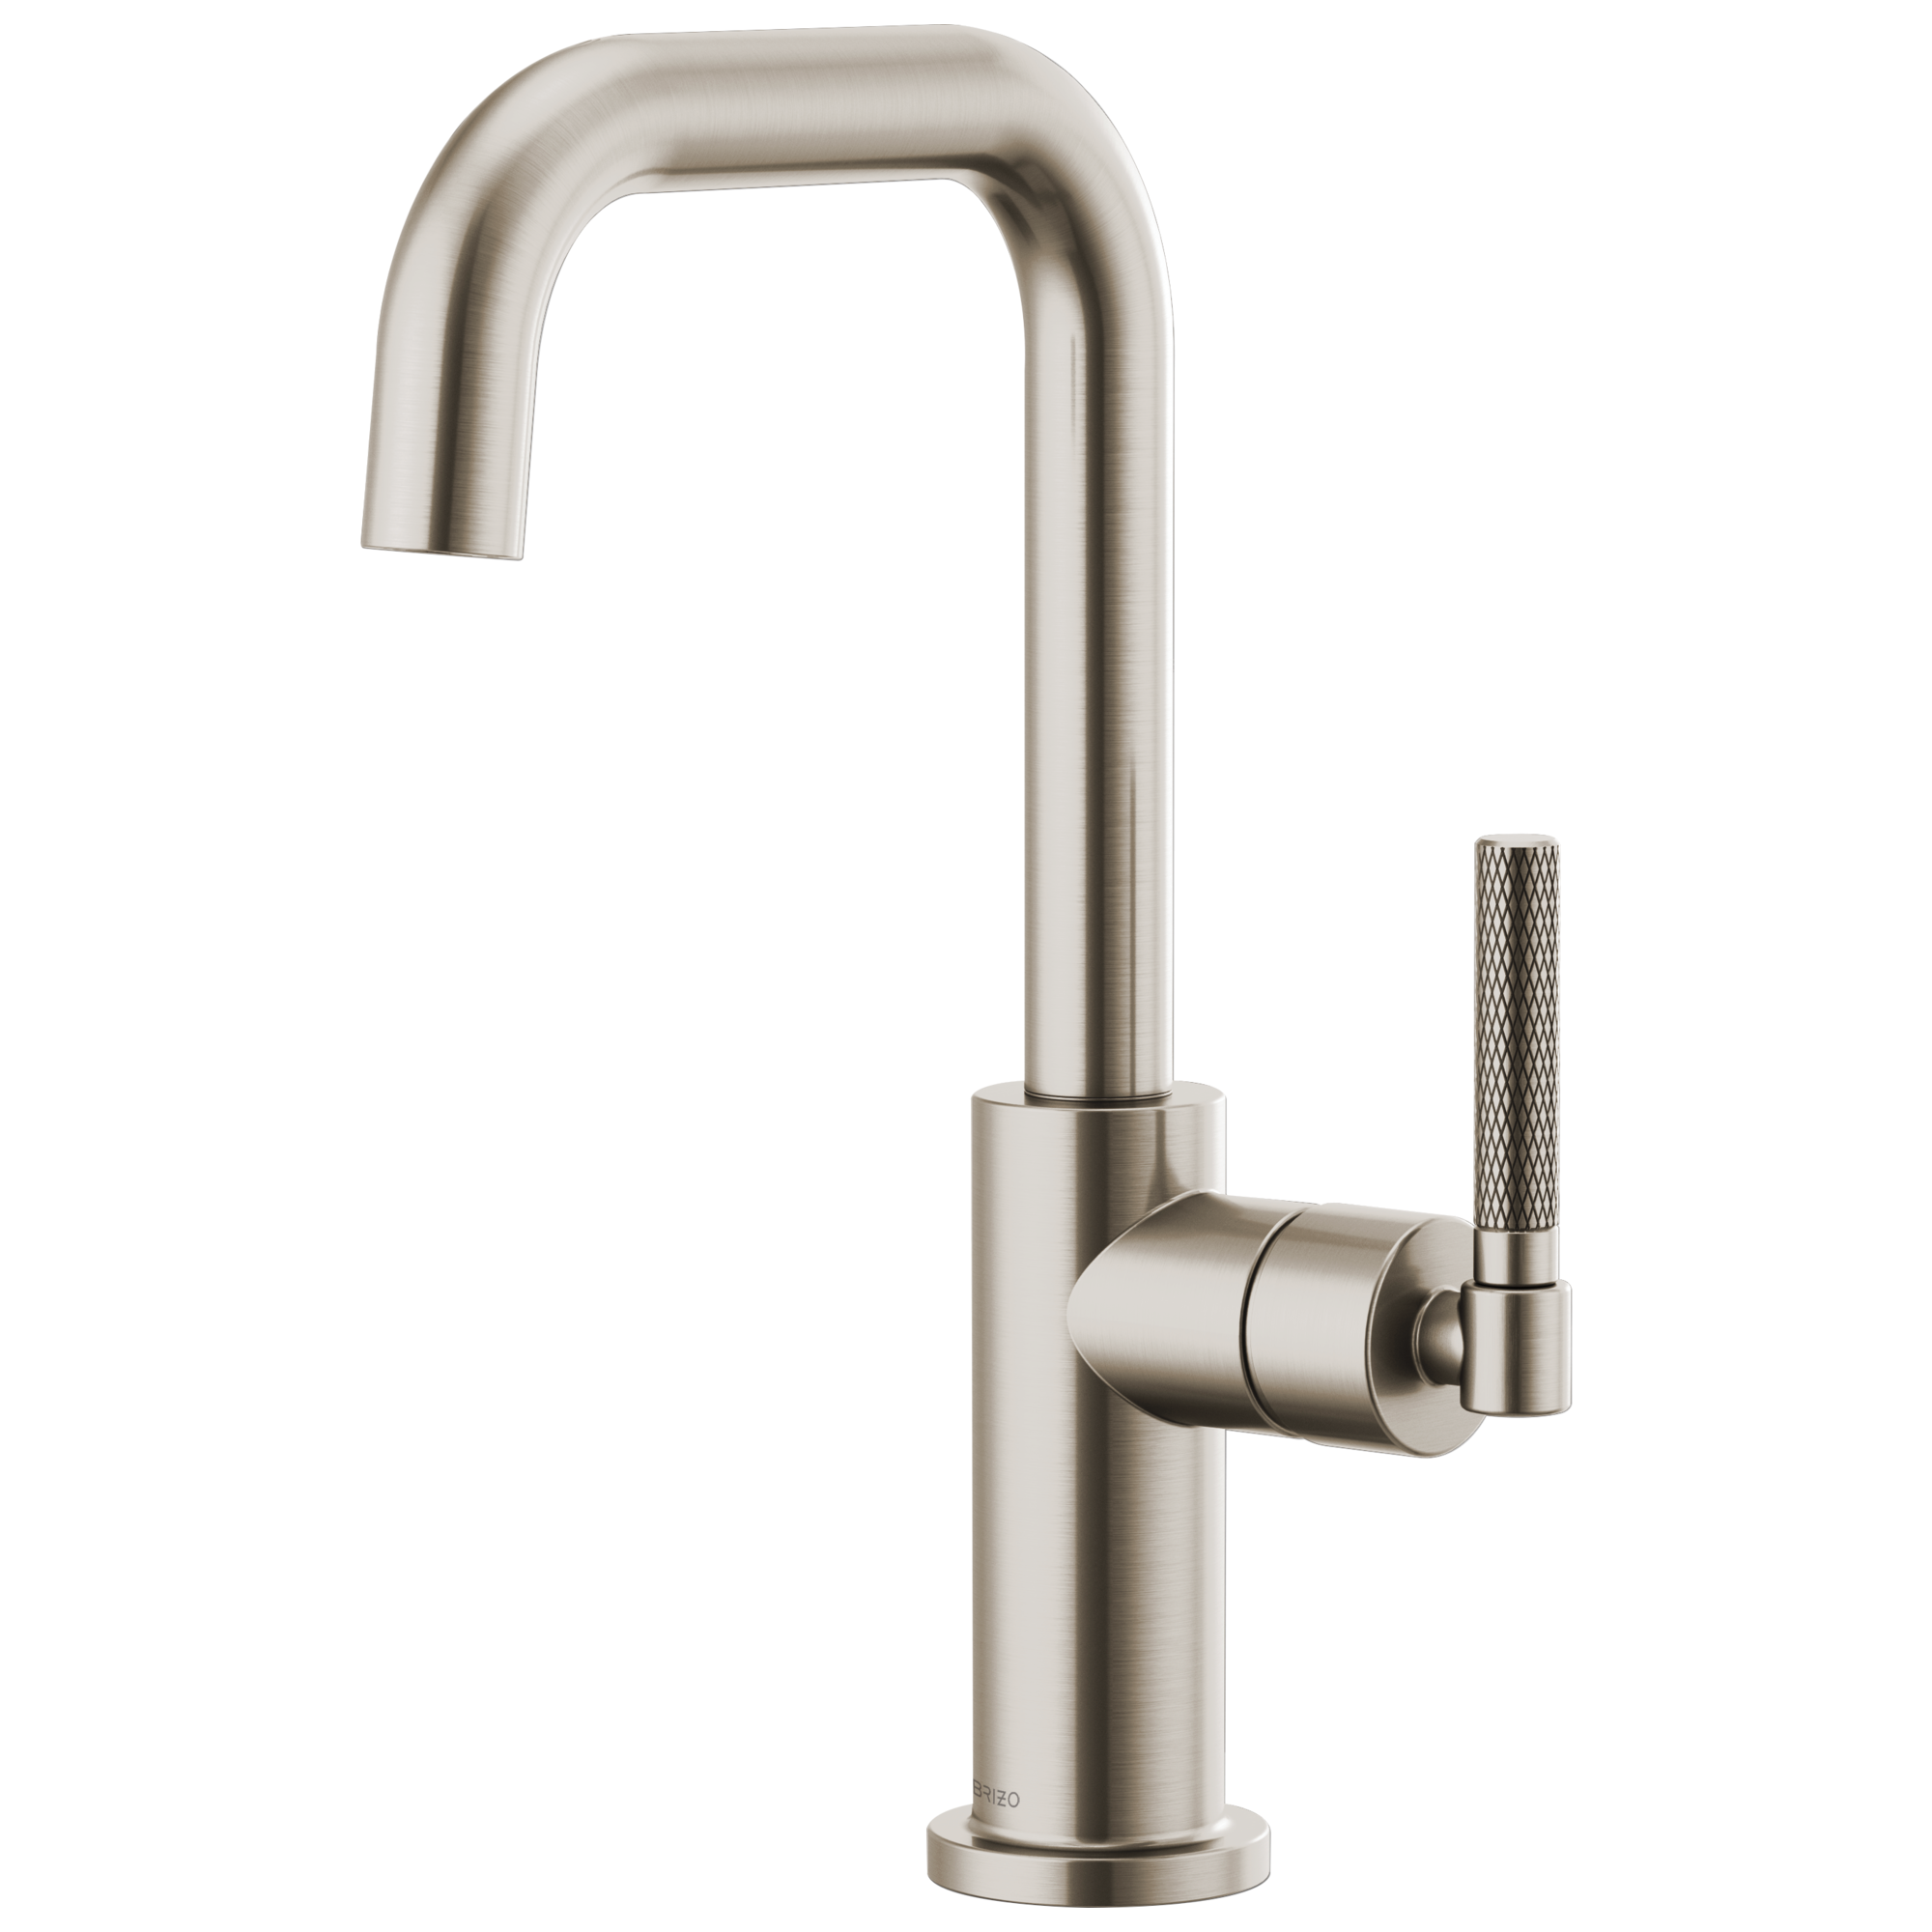 Brizo Litze: Bar Faucet with Square Spout and Knurled Handle